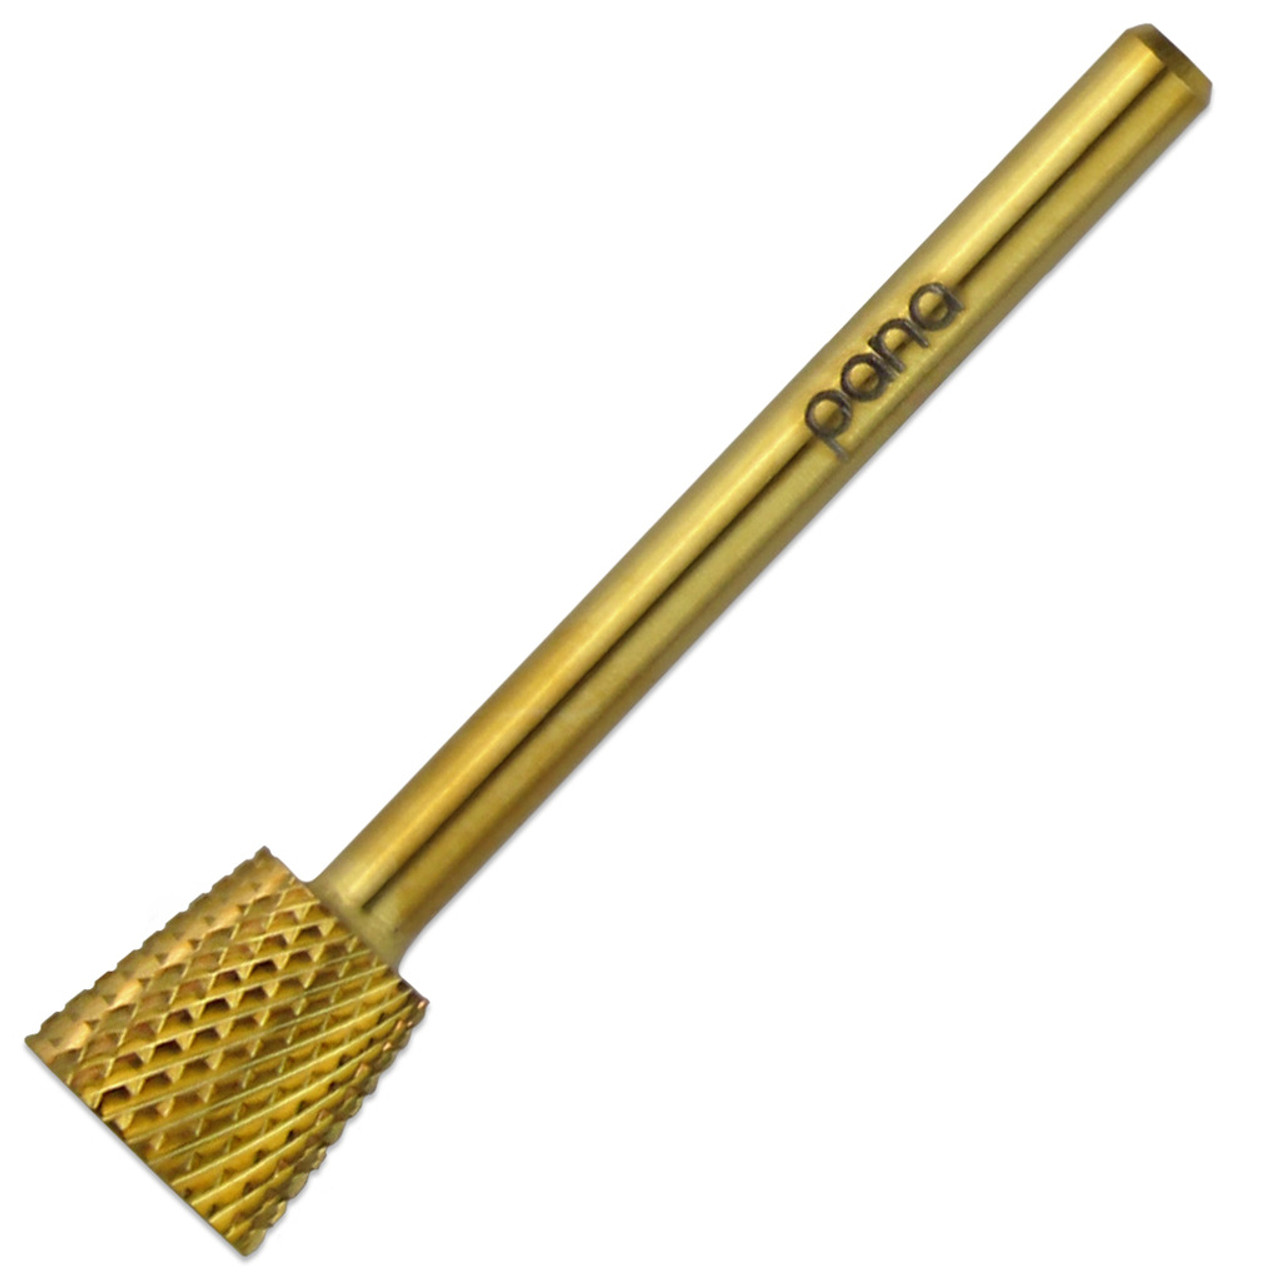 Professional 3/32" Inverted Backfill Gold Carbide Bit